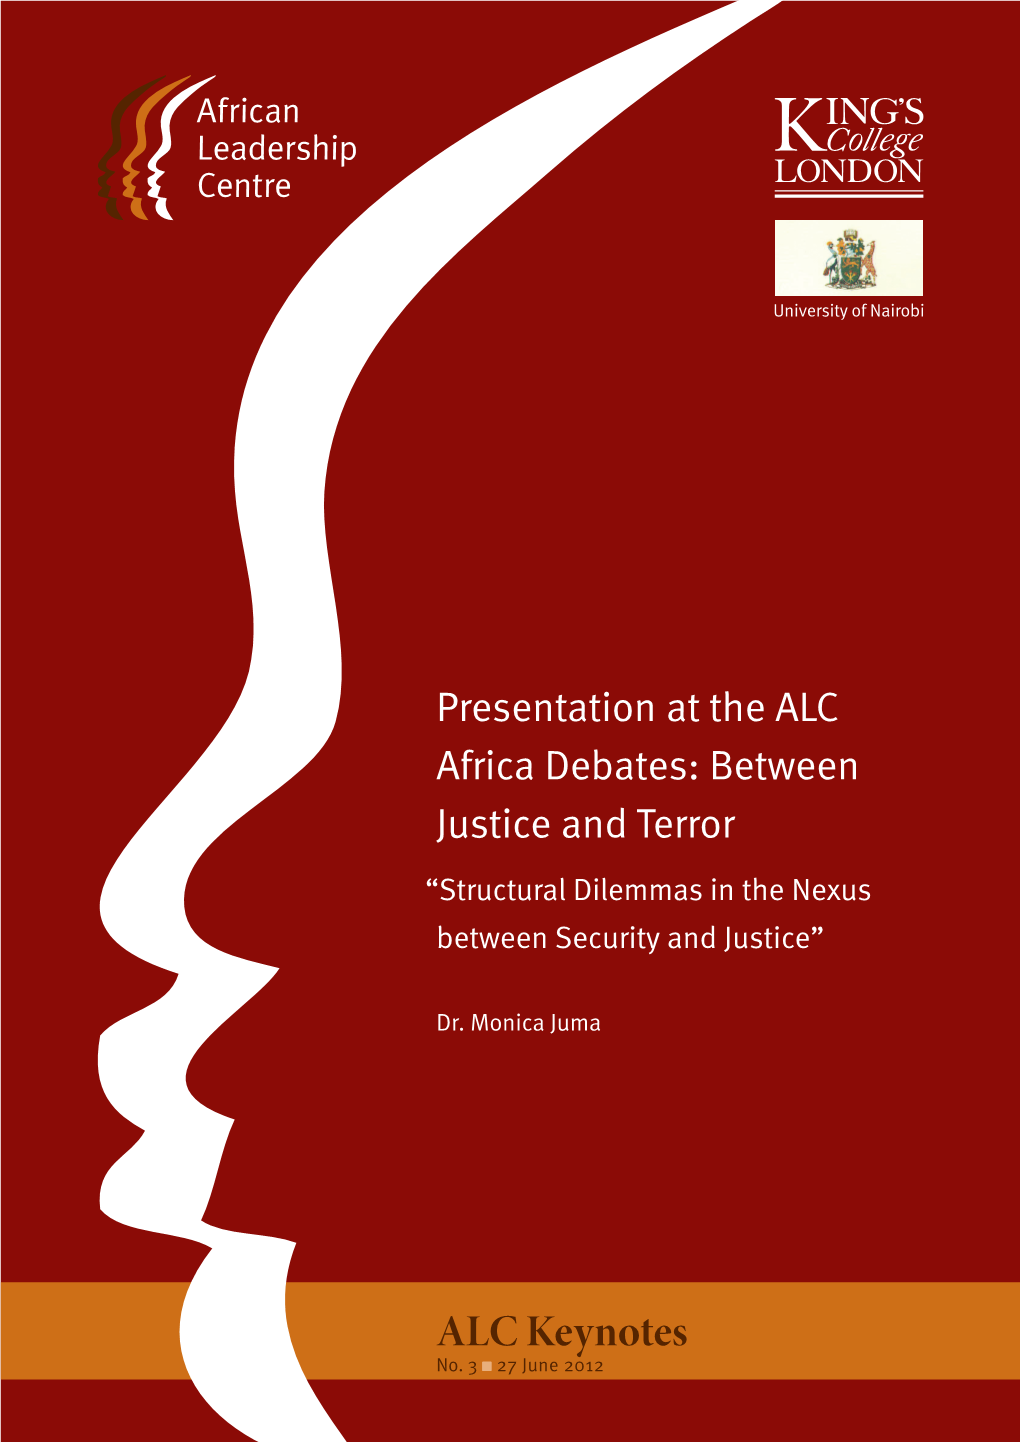 Presentation at the ALC Africa Debates: Between Justice and Terror “Structural Dilemmas in the Nexus Between Security and Justice”